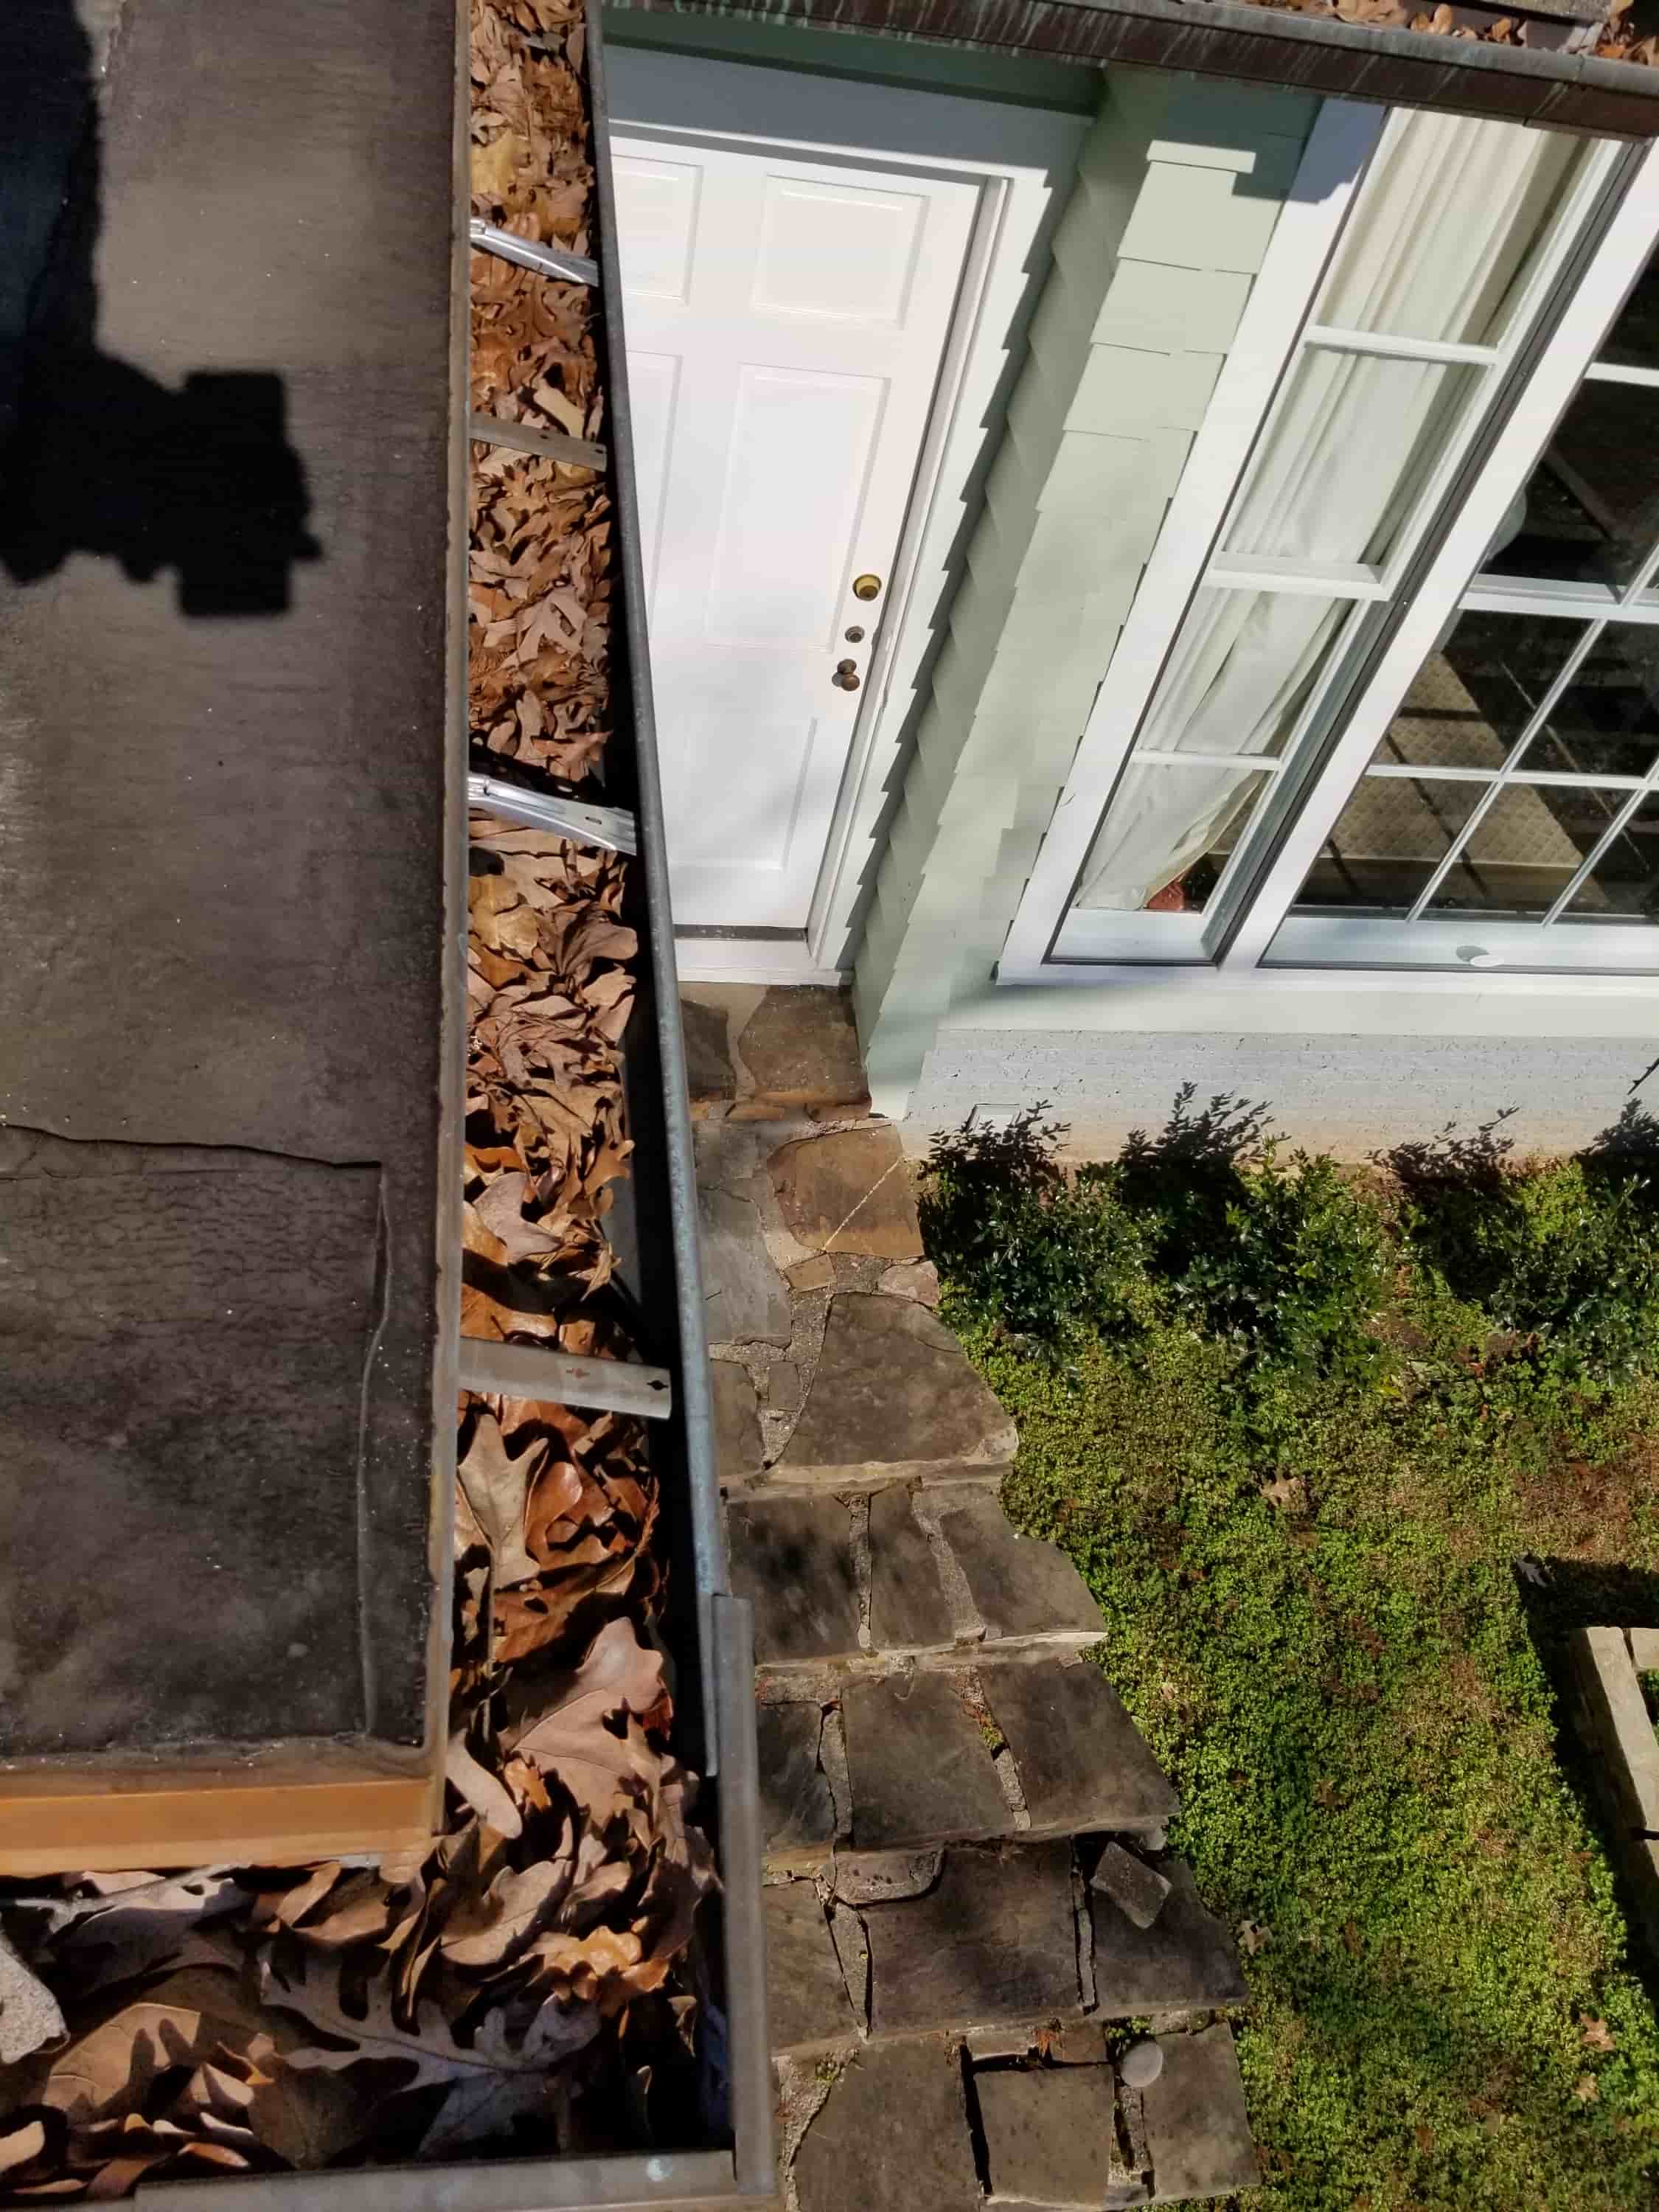 price of gutter cleaning